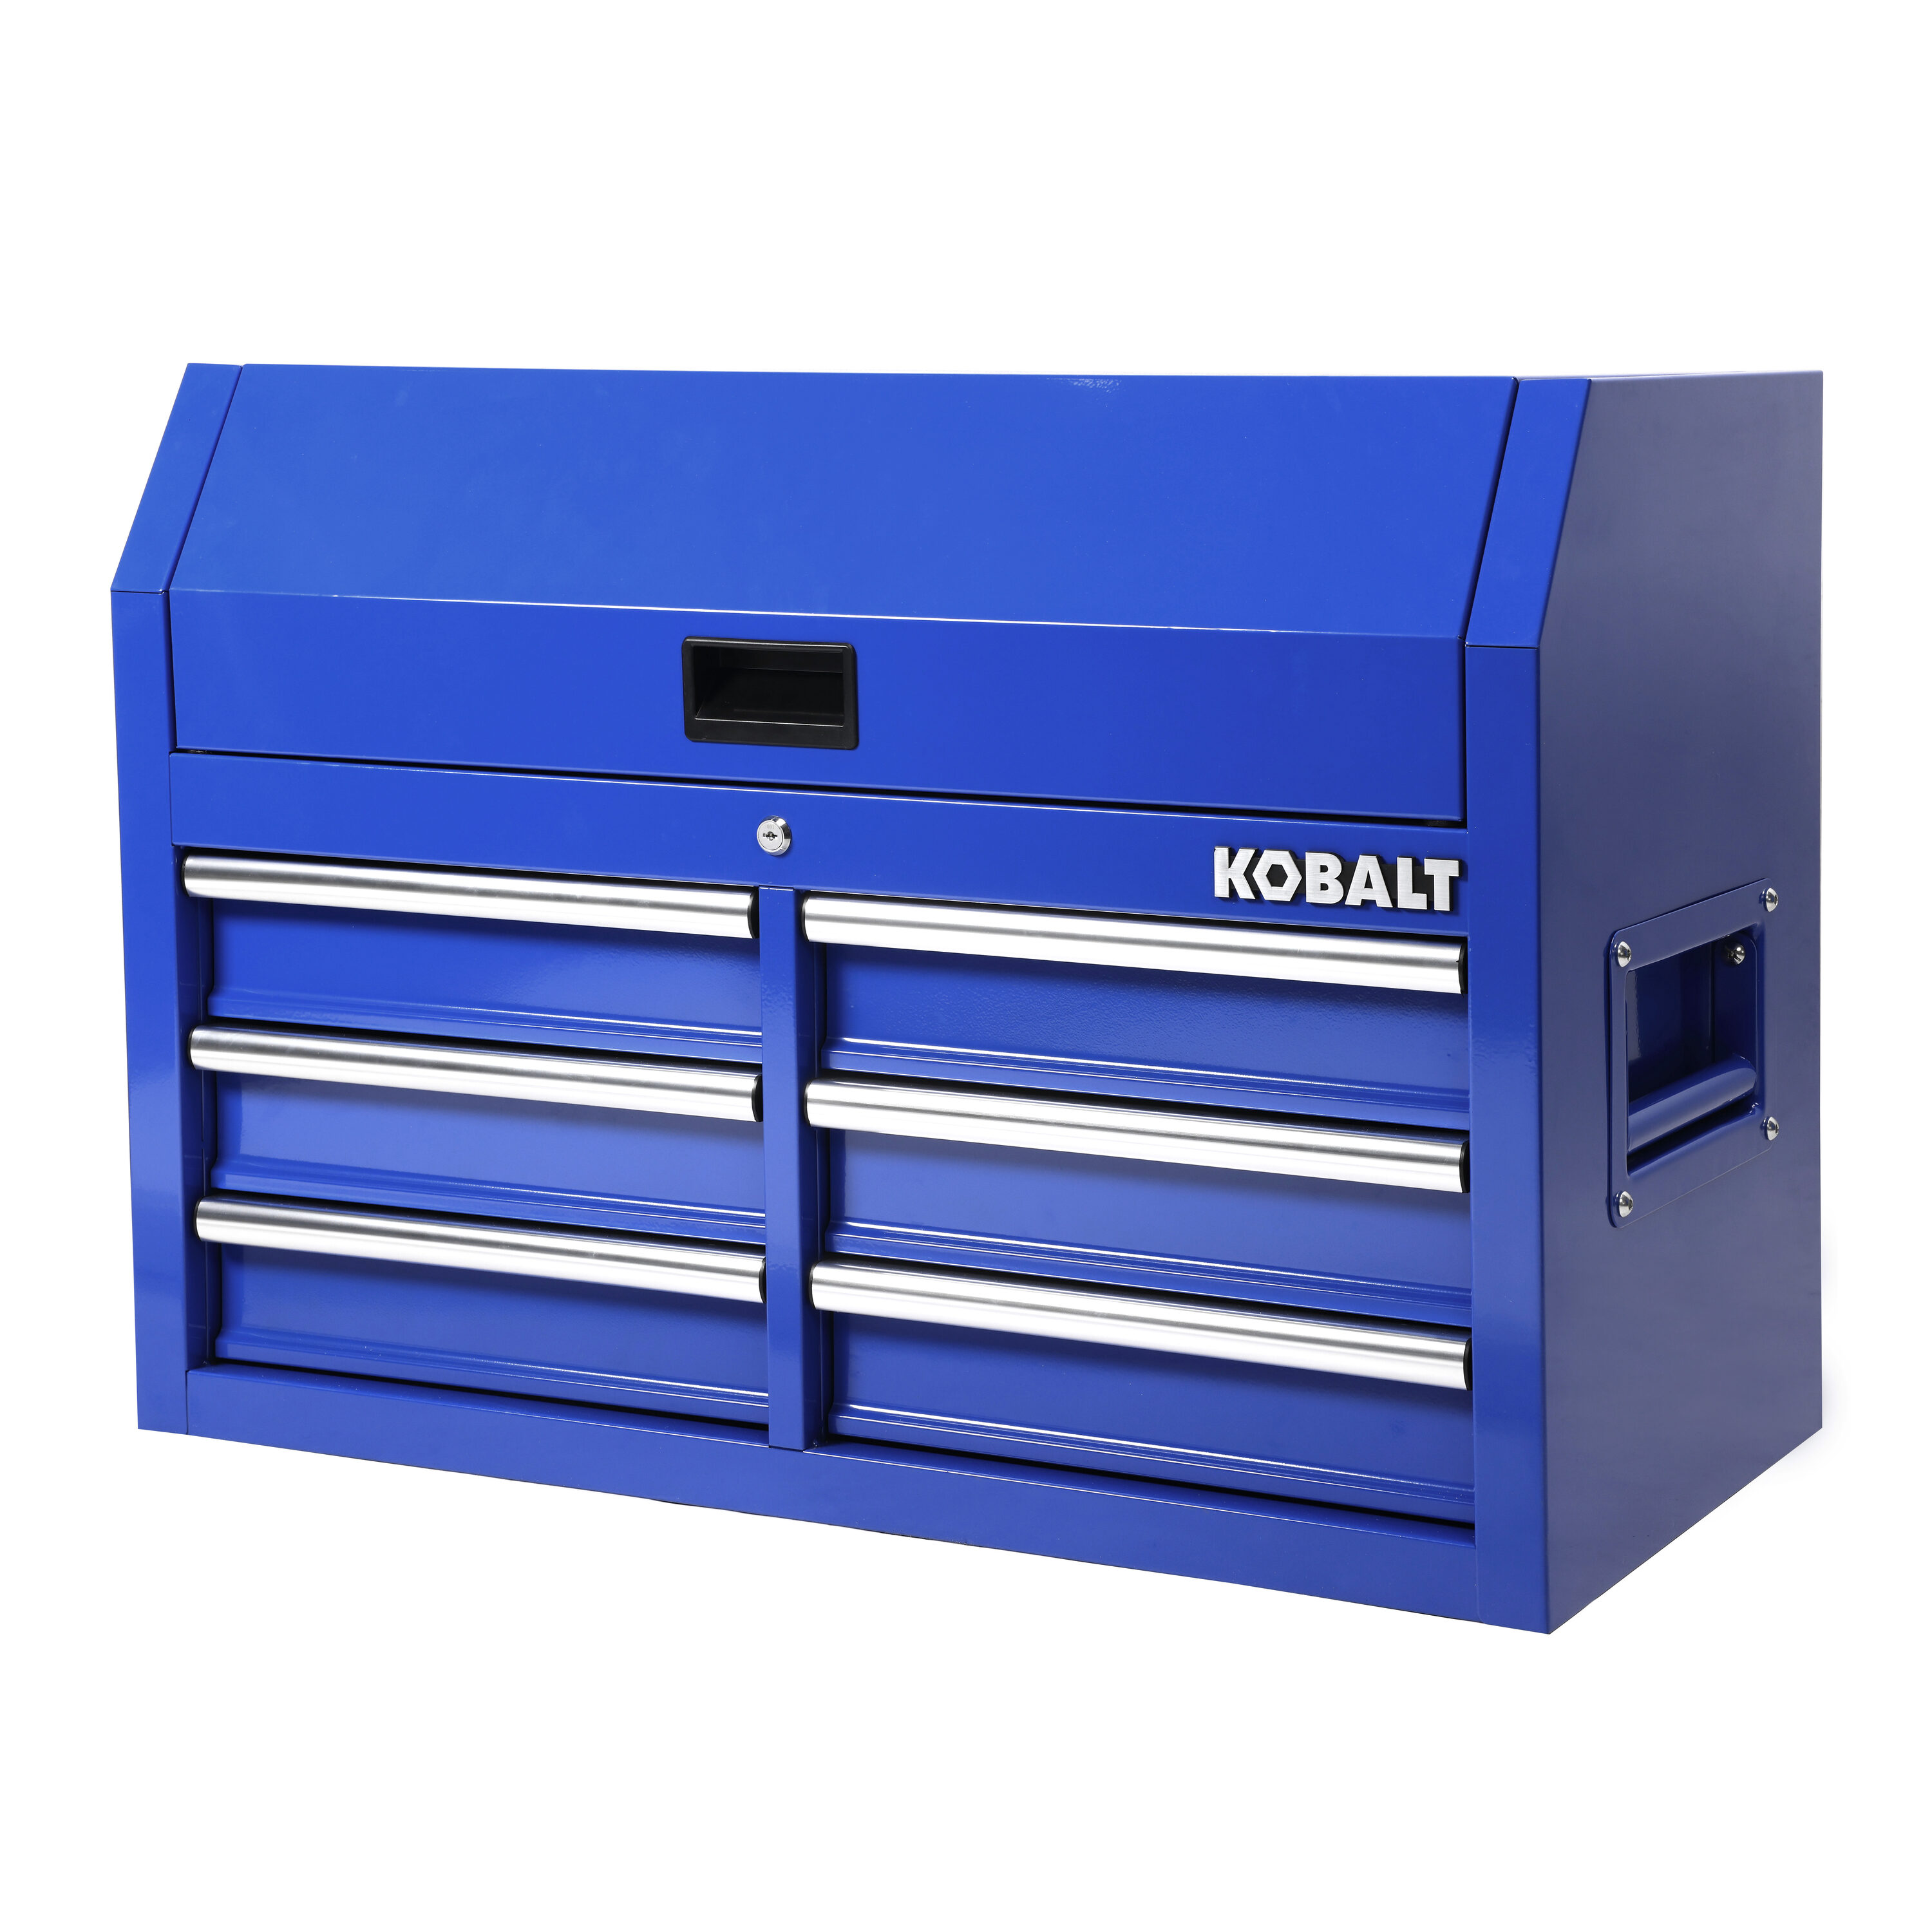 Kobalt 35.6-in W x 24.8-in H 6-Drawer Steel Tool Chest (Blue) at